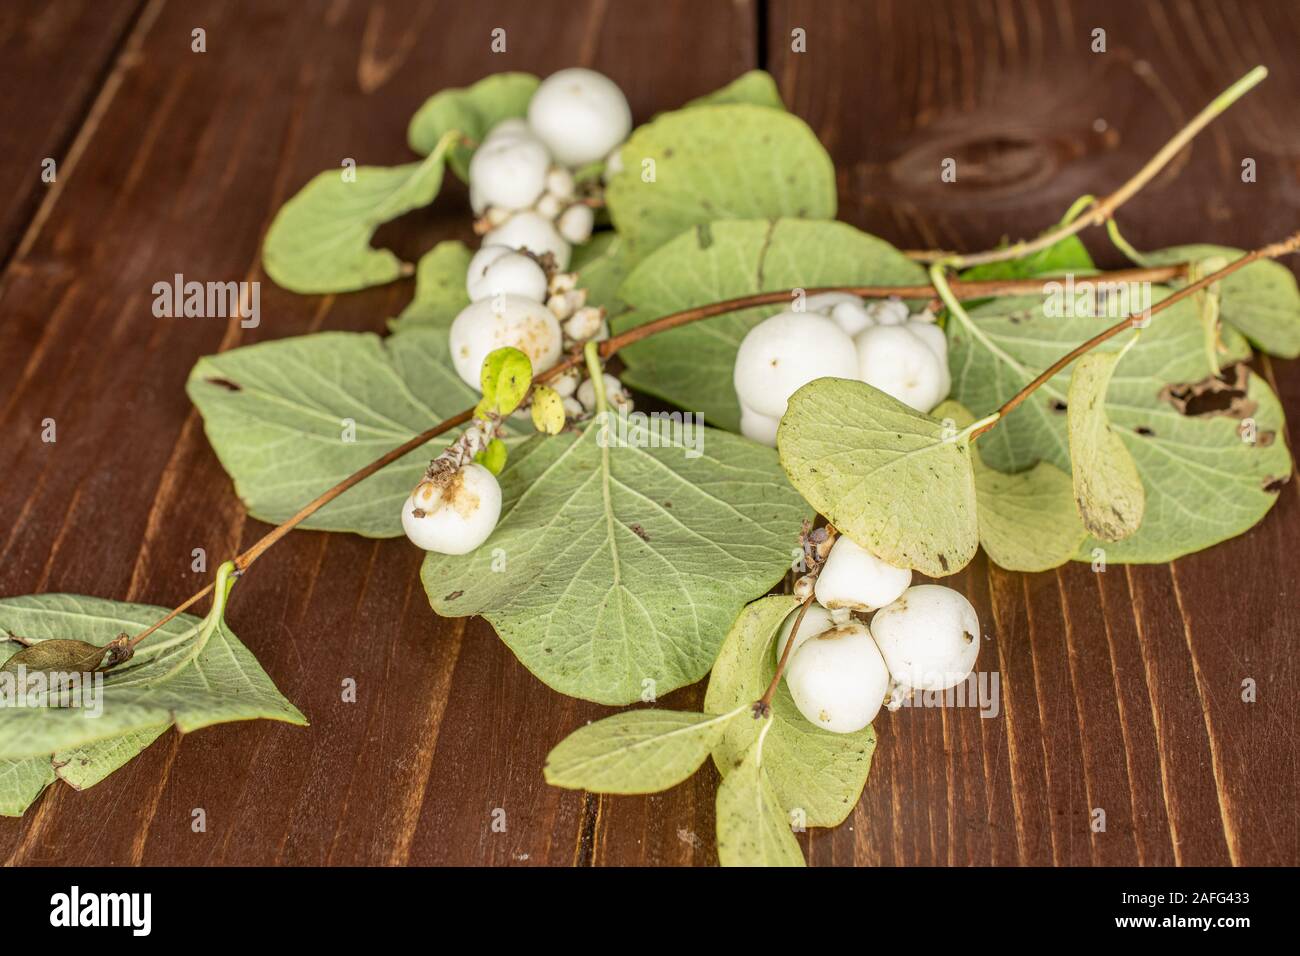 Lot of whole white snowberry on brown wood Stock Photo